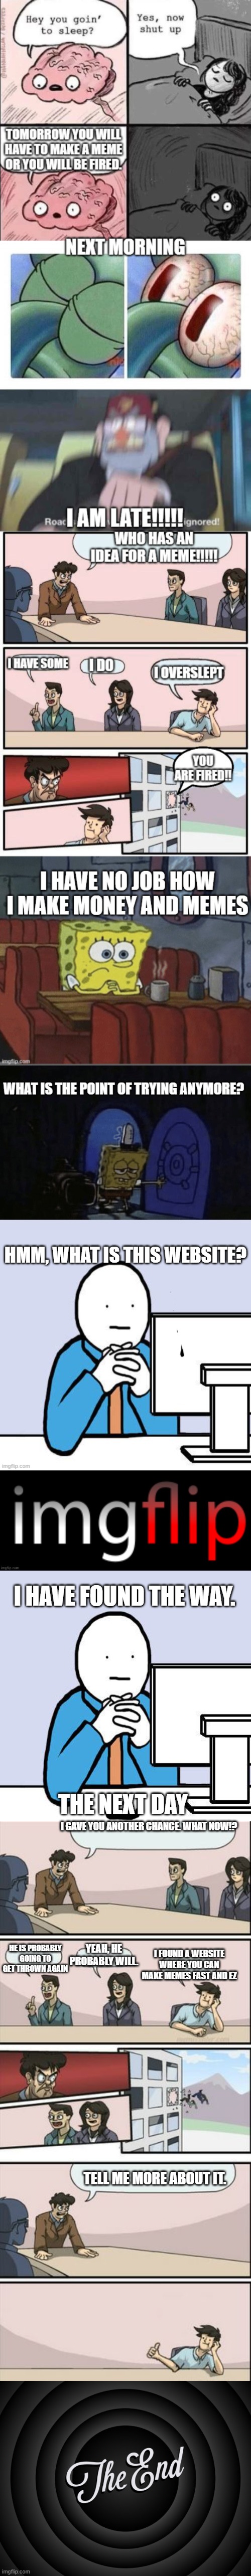 The meme comic. | HMM, WHAT IS THIS WEBSITE? I HAVE FOUND THE WAY. THE NEXT DAY; I GAVE YOU ANOTHER CHANCE. WHAT NOW!? YEAH, HE PROBABLY WILL. I FOUND A WEBSITE WHERE YOU CAN MAKE MEMES FAST AND EZ; HE IS PROBABLY GOING TO GET THROWN AGAIN; TELL ME MORE ABOUT IT. | image tagged in comics/cartoons,memes,funny | made w/ Imgflip meme maker